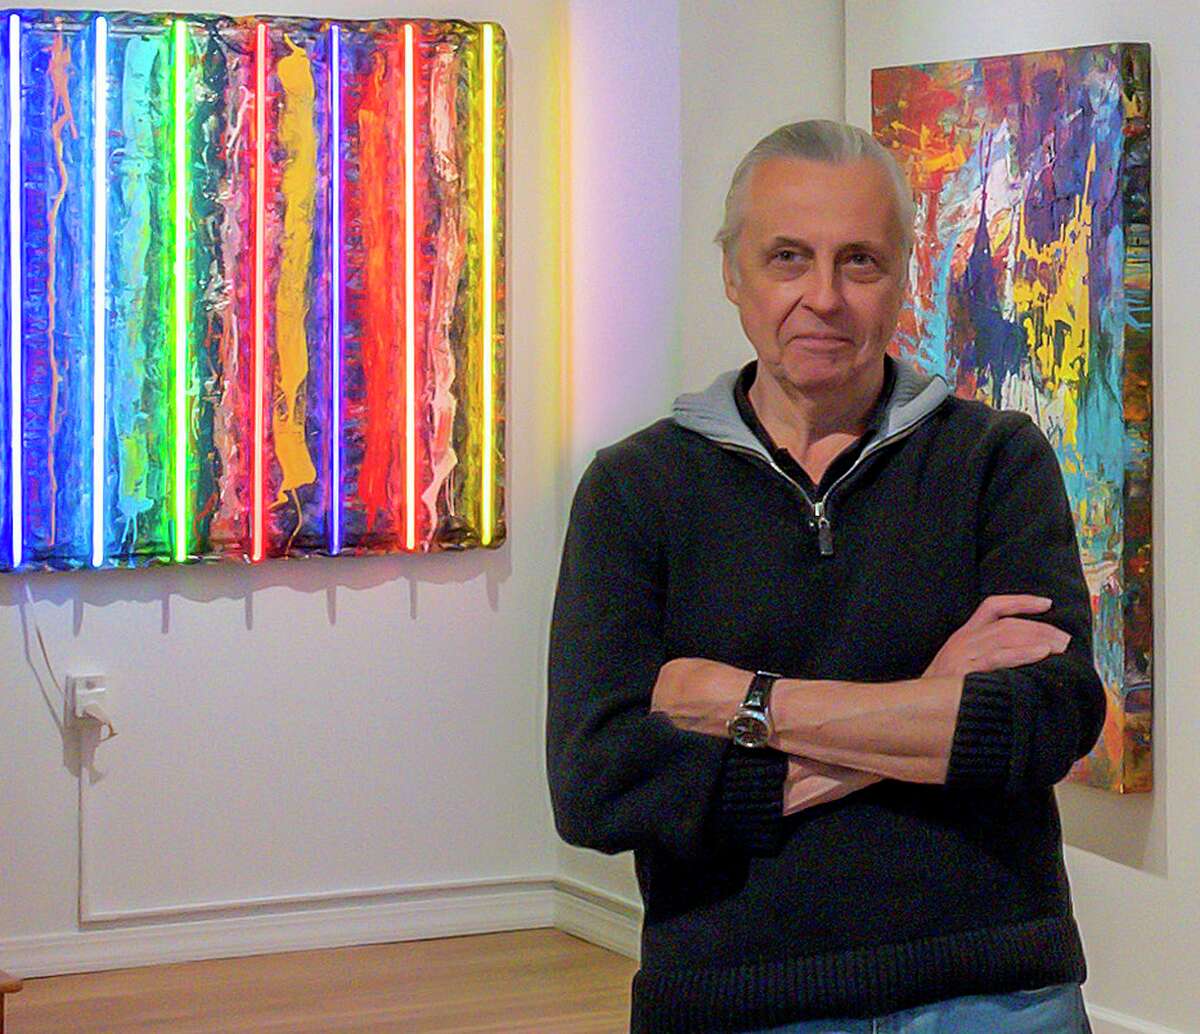 Dan Makara's work is currently on display at the Jean Jacobs Gallery through July 18.